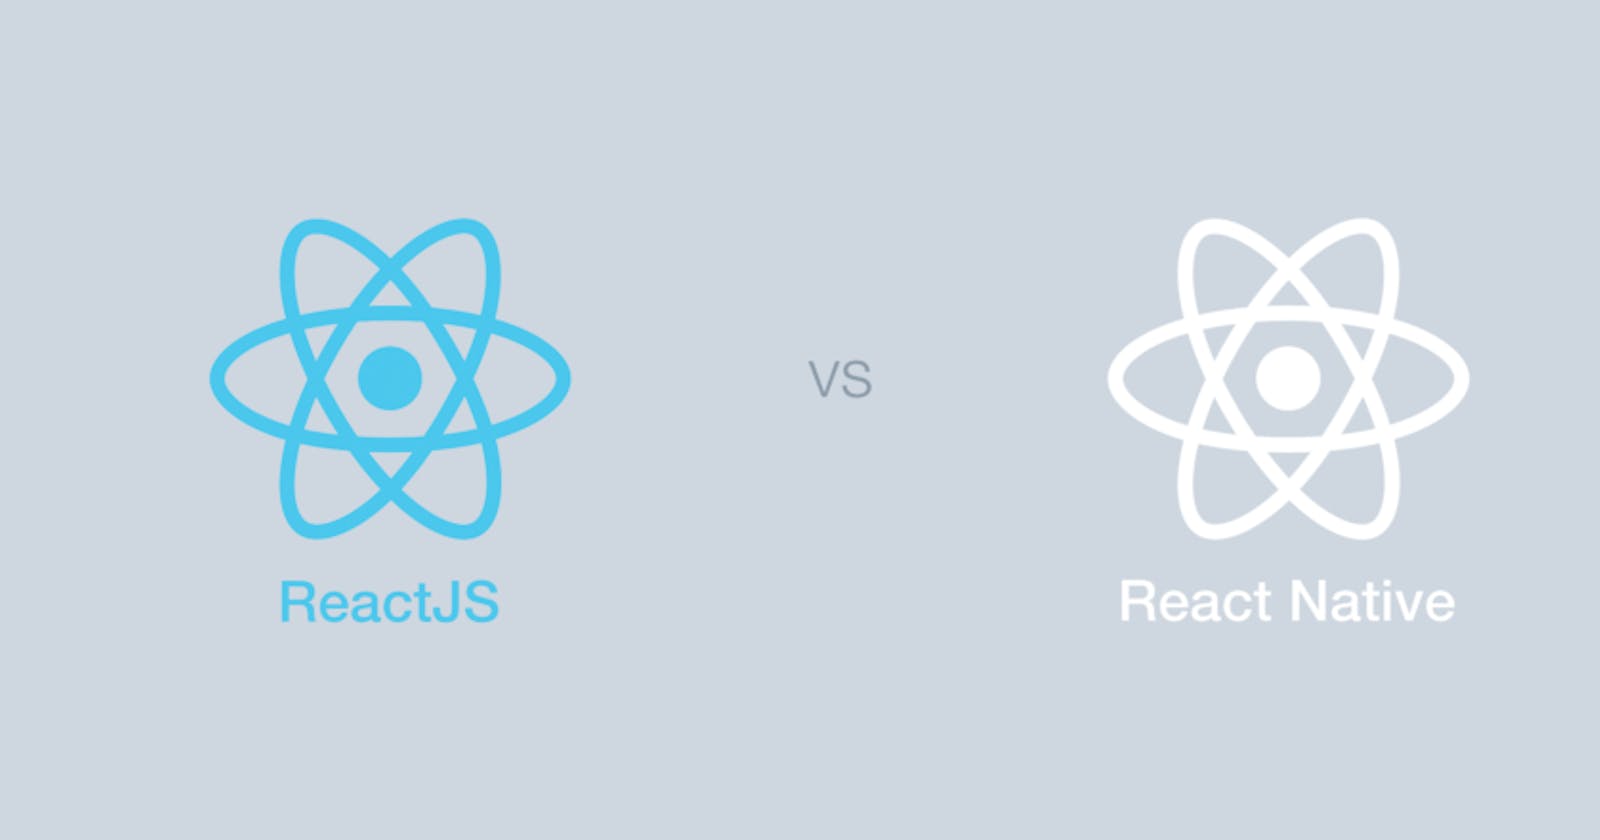 From ReactJS to React-Native, what are the main differences between both?